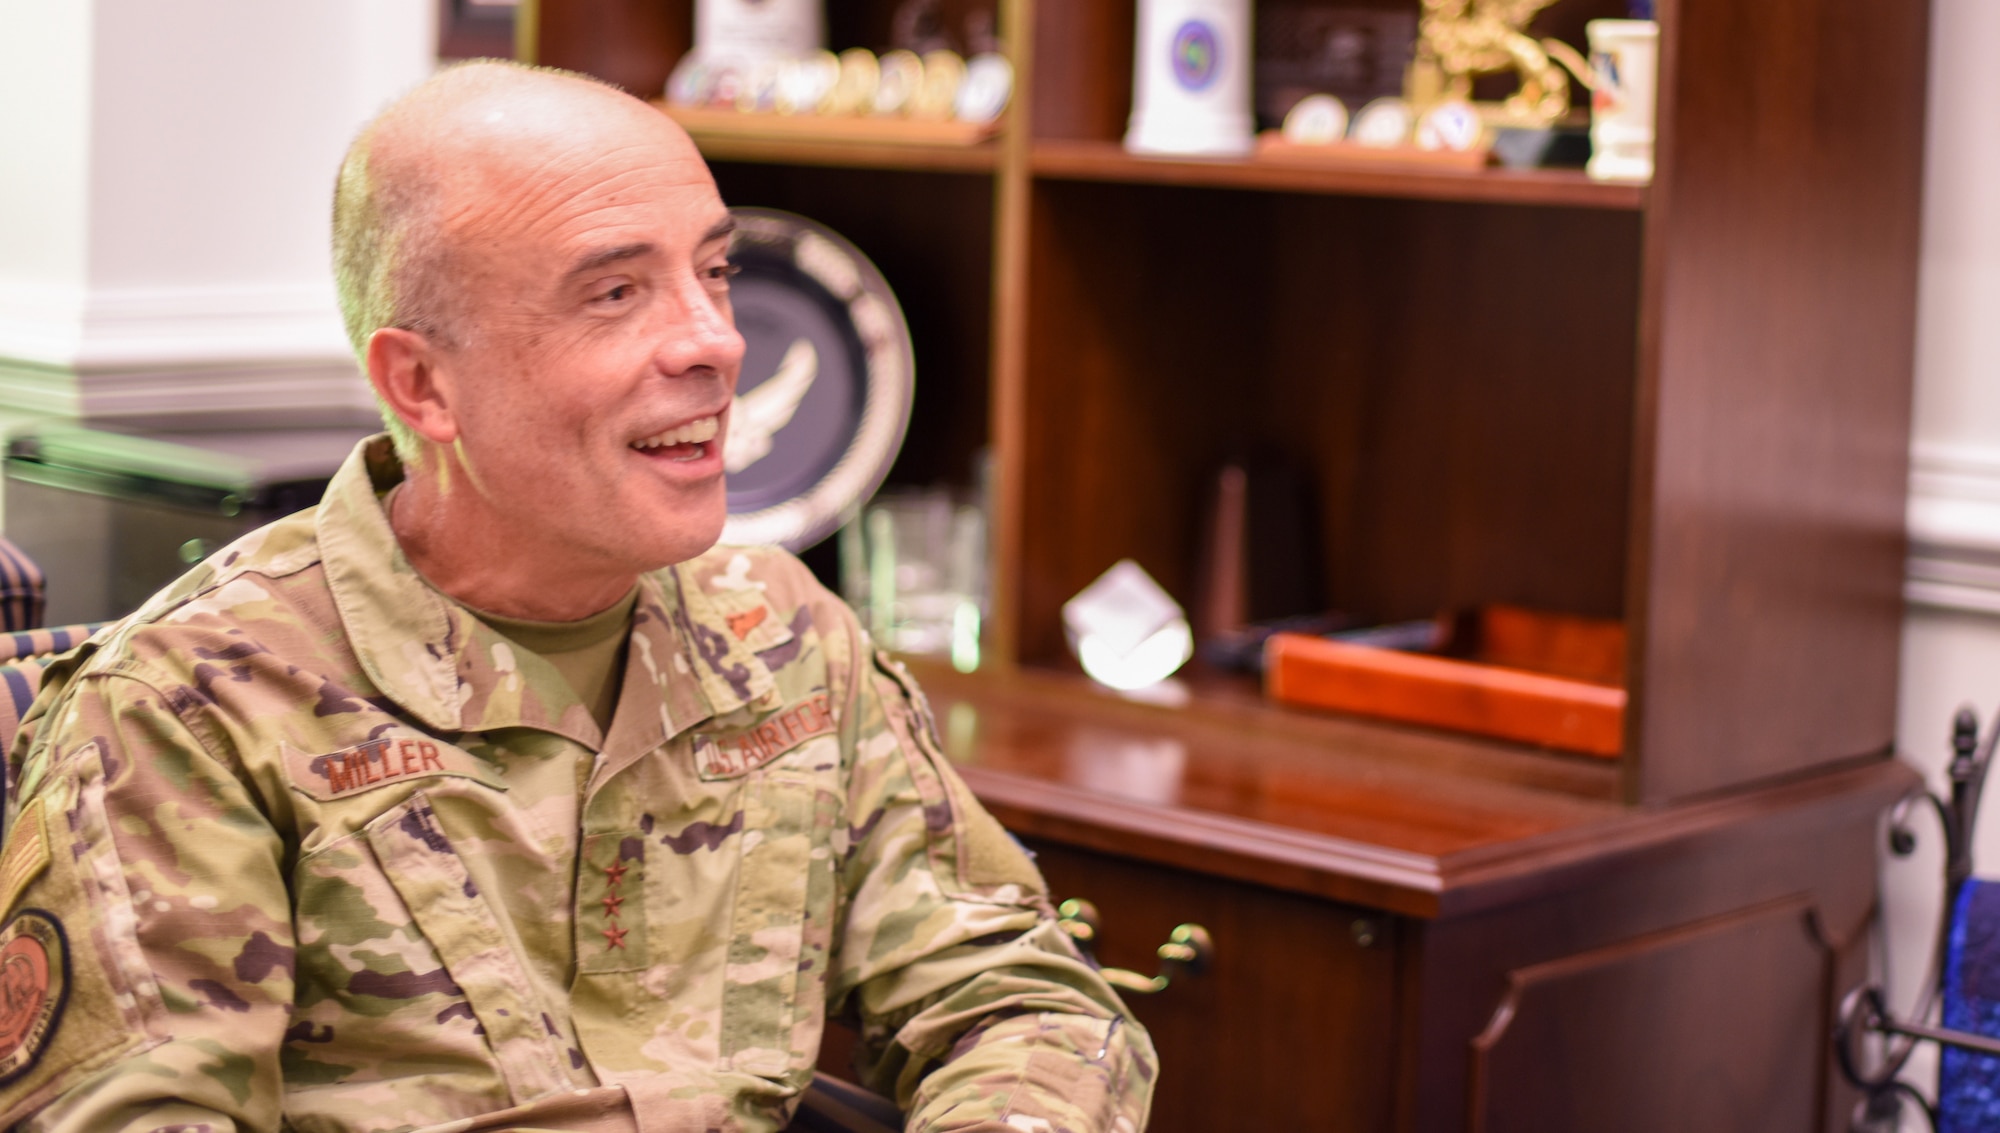 Image of an Airman smiling.